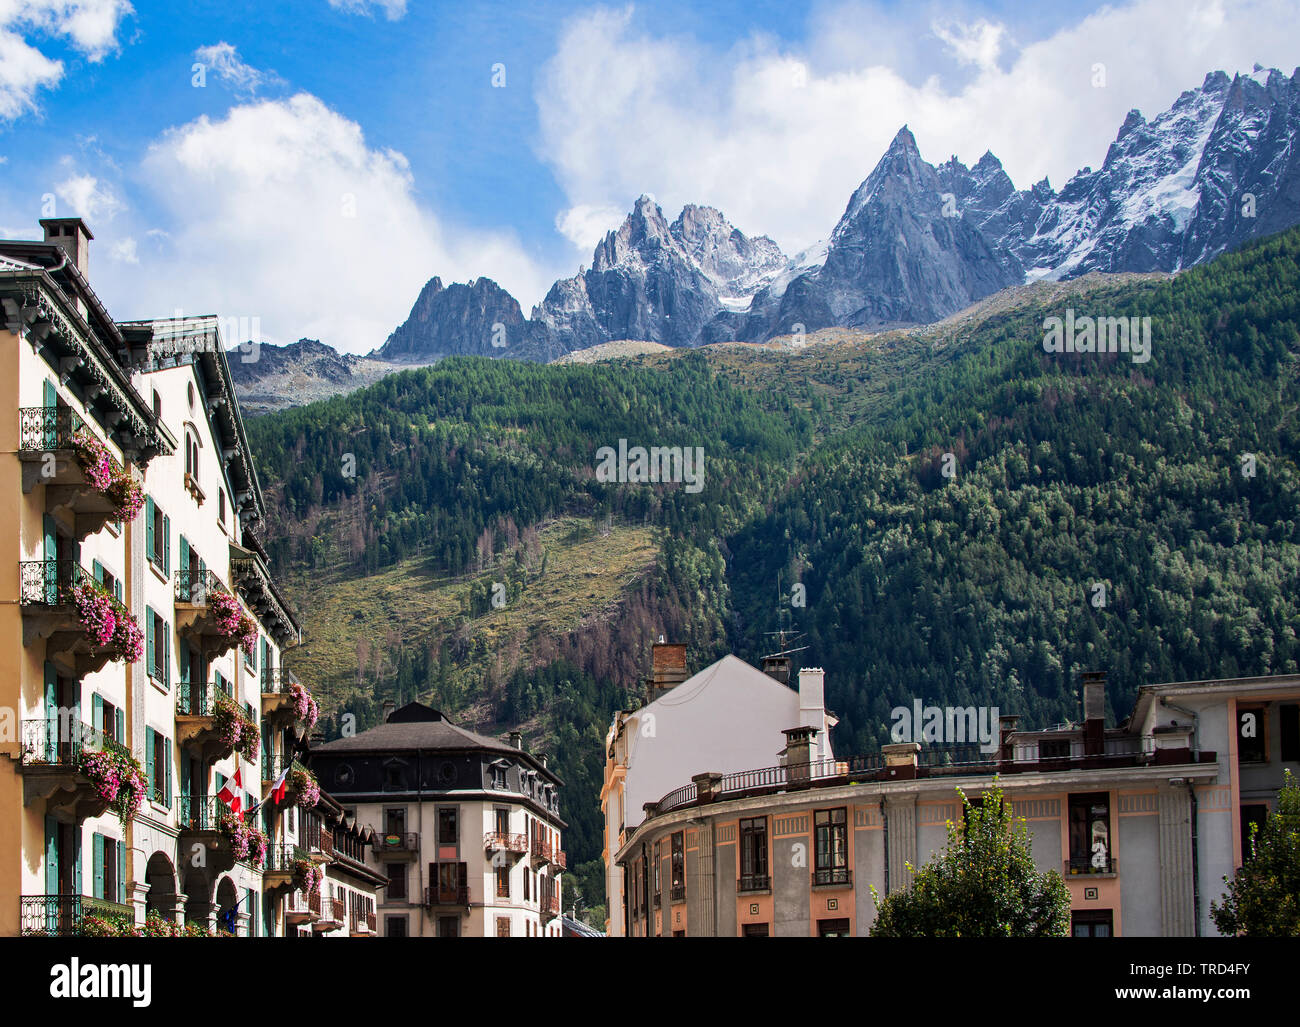 Chamonix Town Center with the snowy French Alps in the Background, French Alps, Savoy, France, Europe Stock Photo